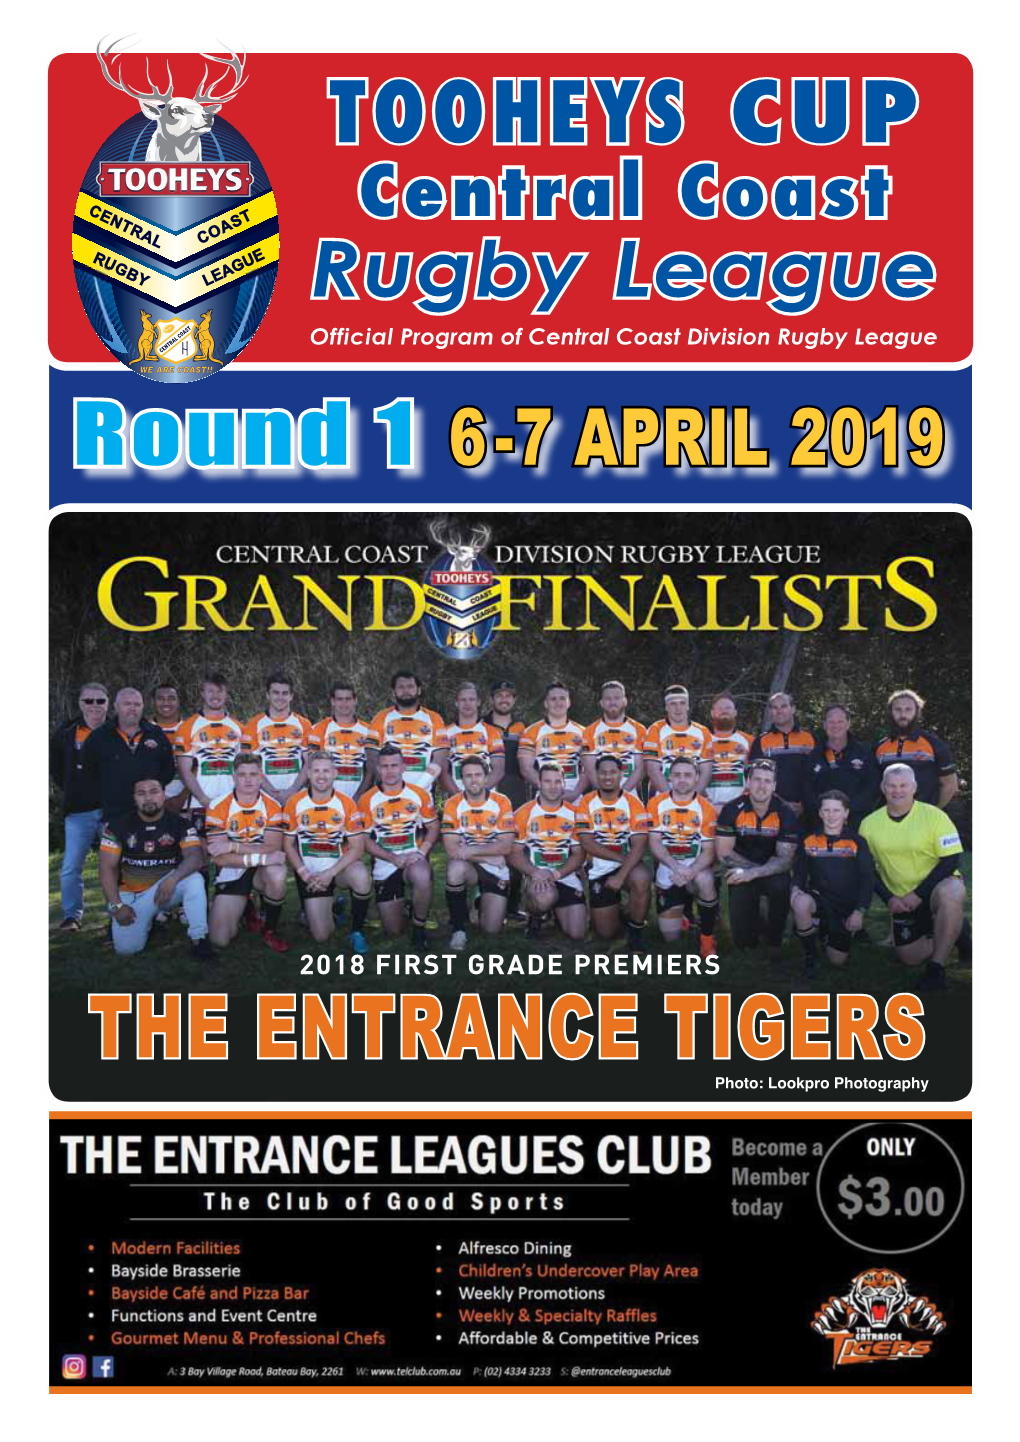 THE ENTRANCE TIGERS Photo: Lookpro Photography 2018 FINAL SERIES RESULTS